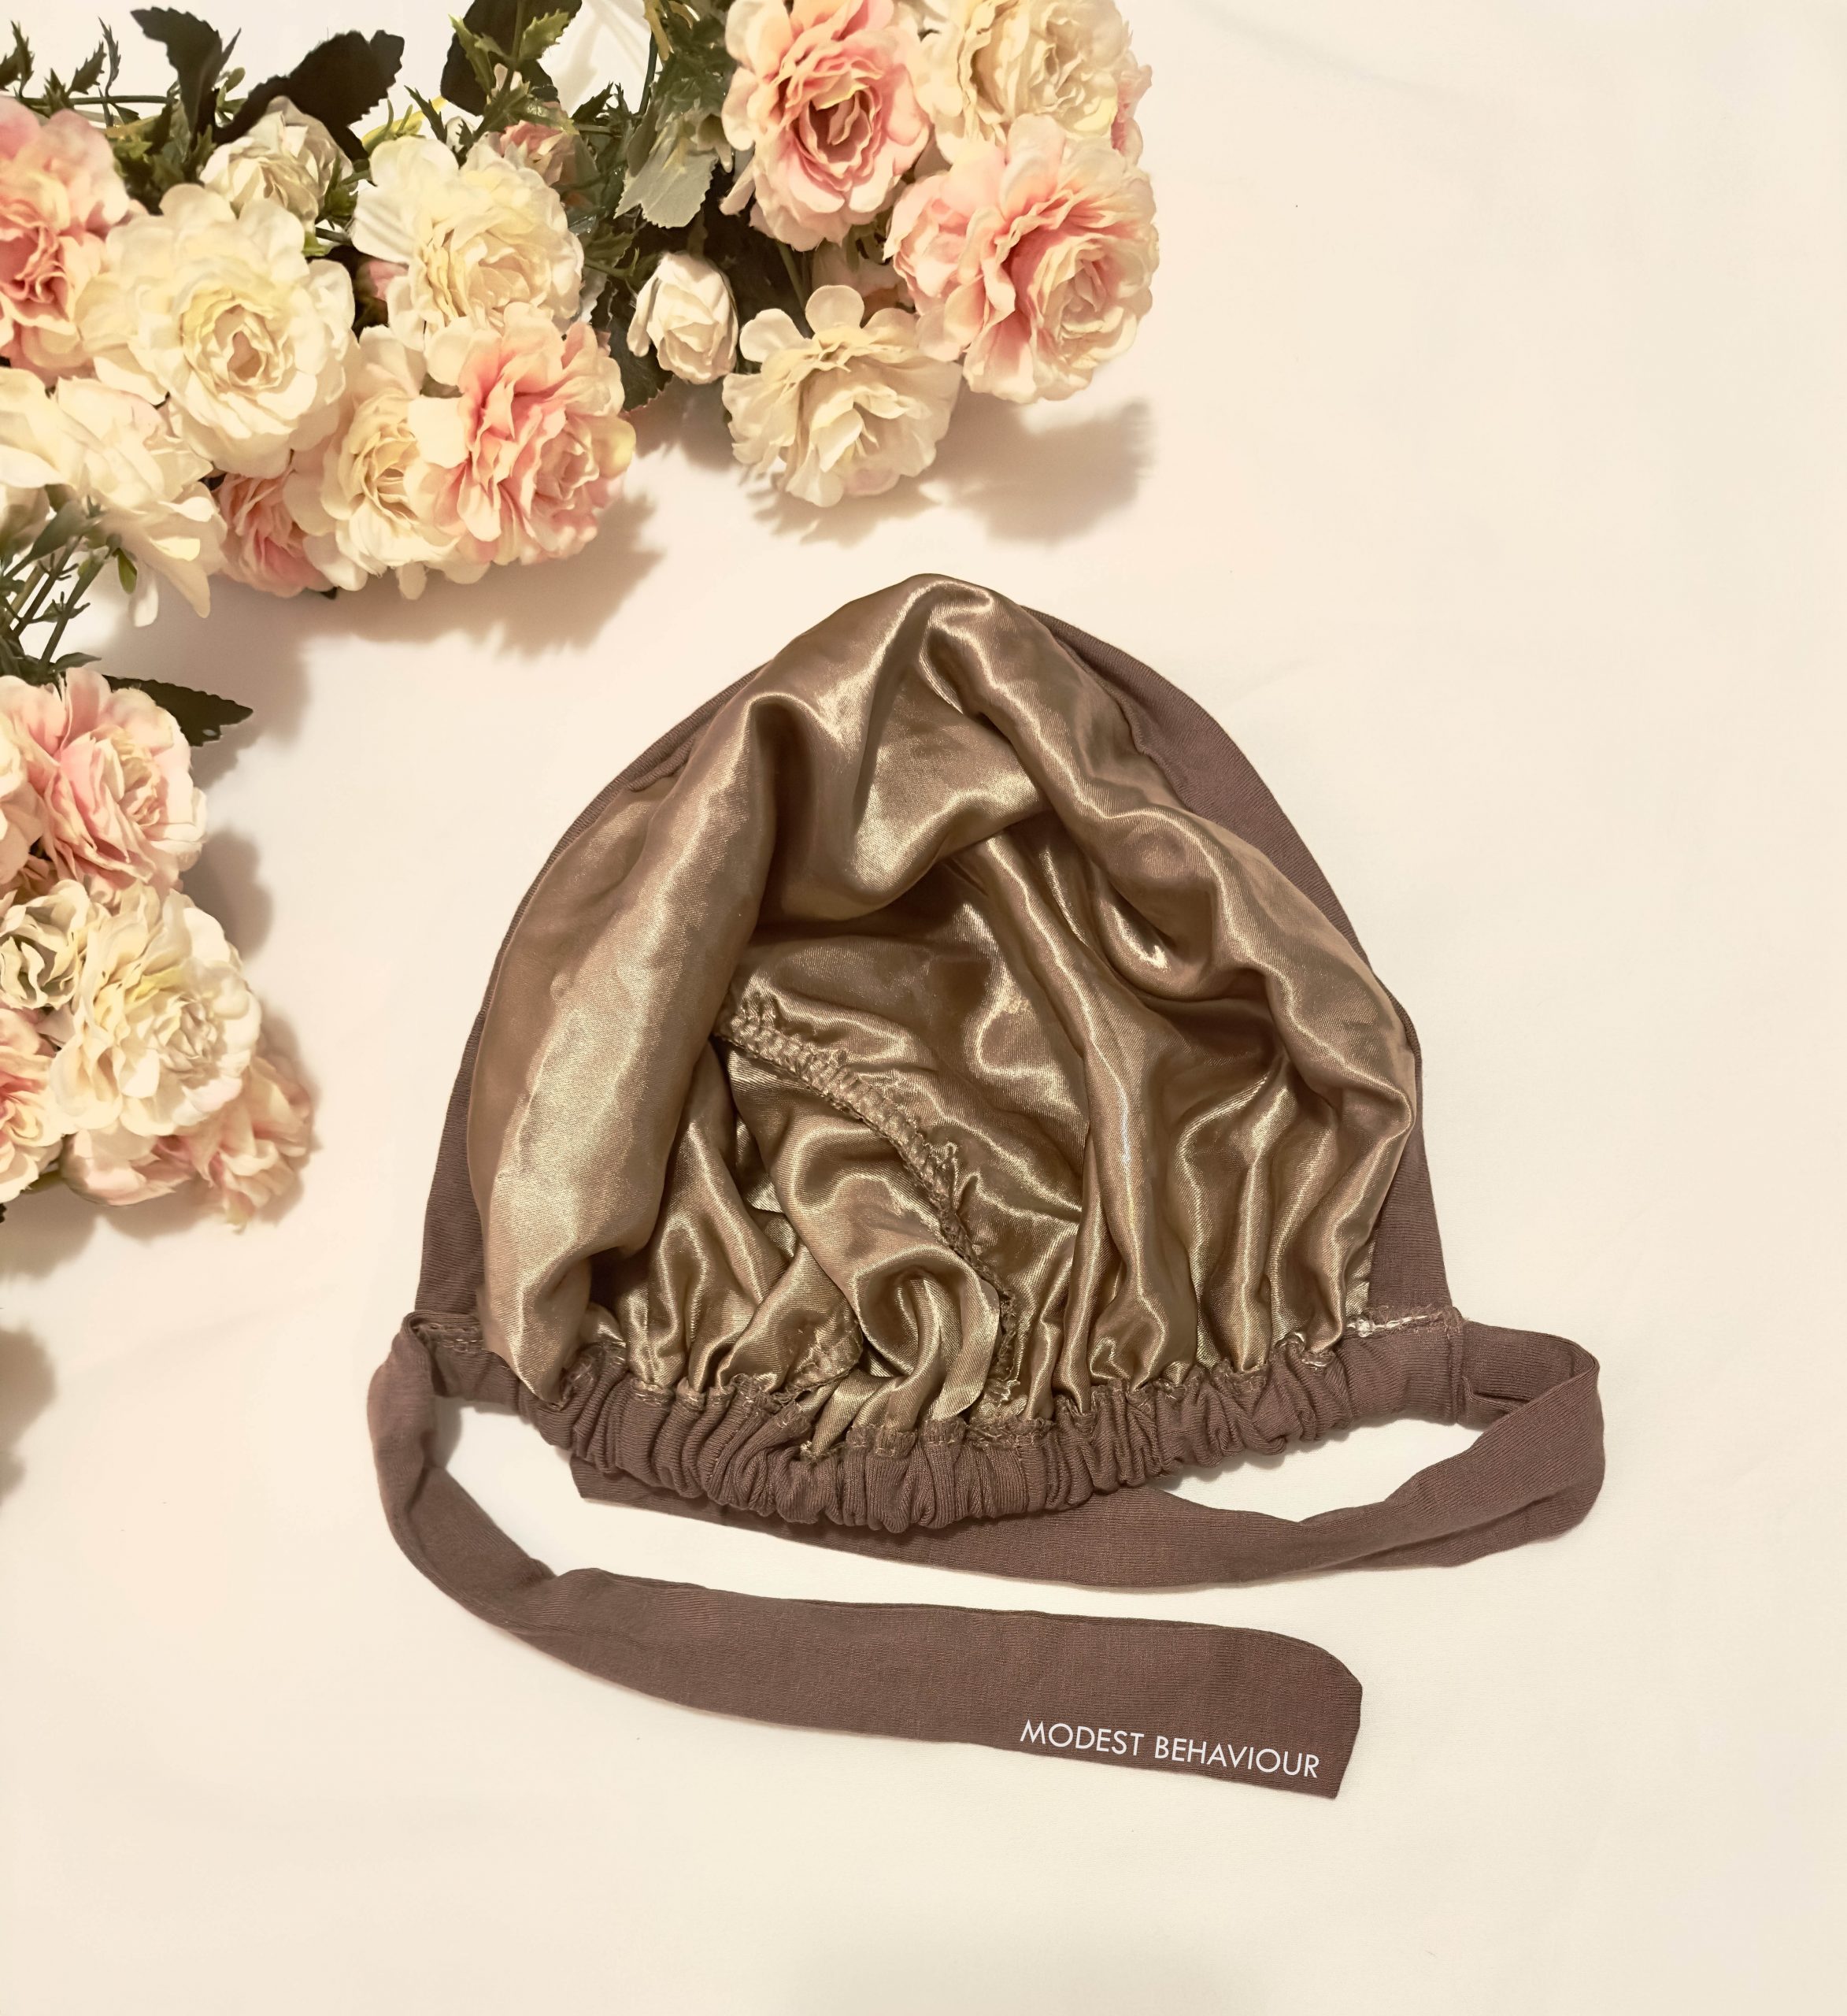 Veiled Collection Tie Back Undercap - Sand